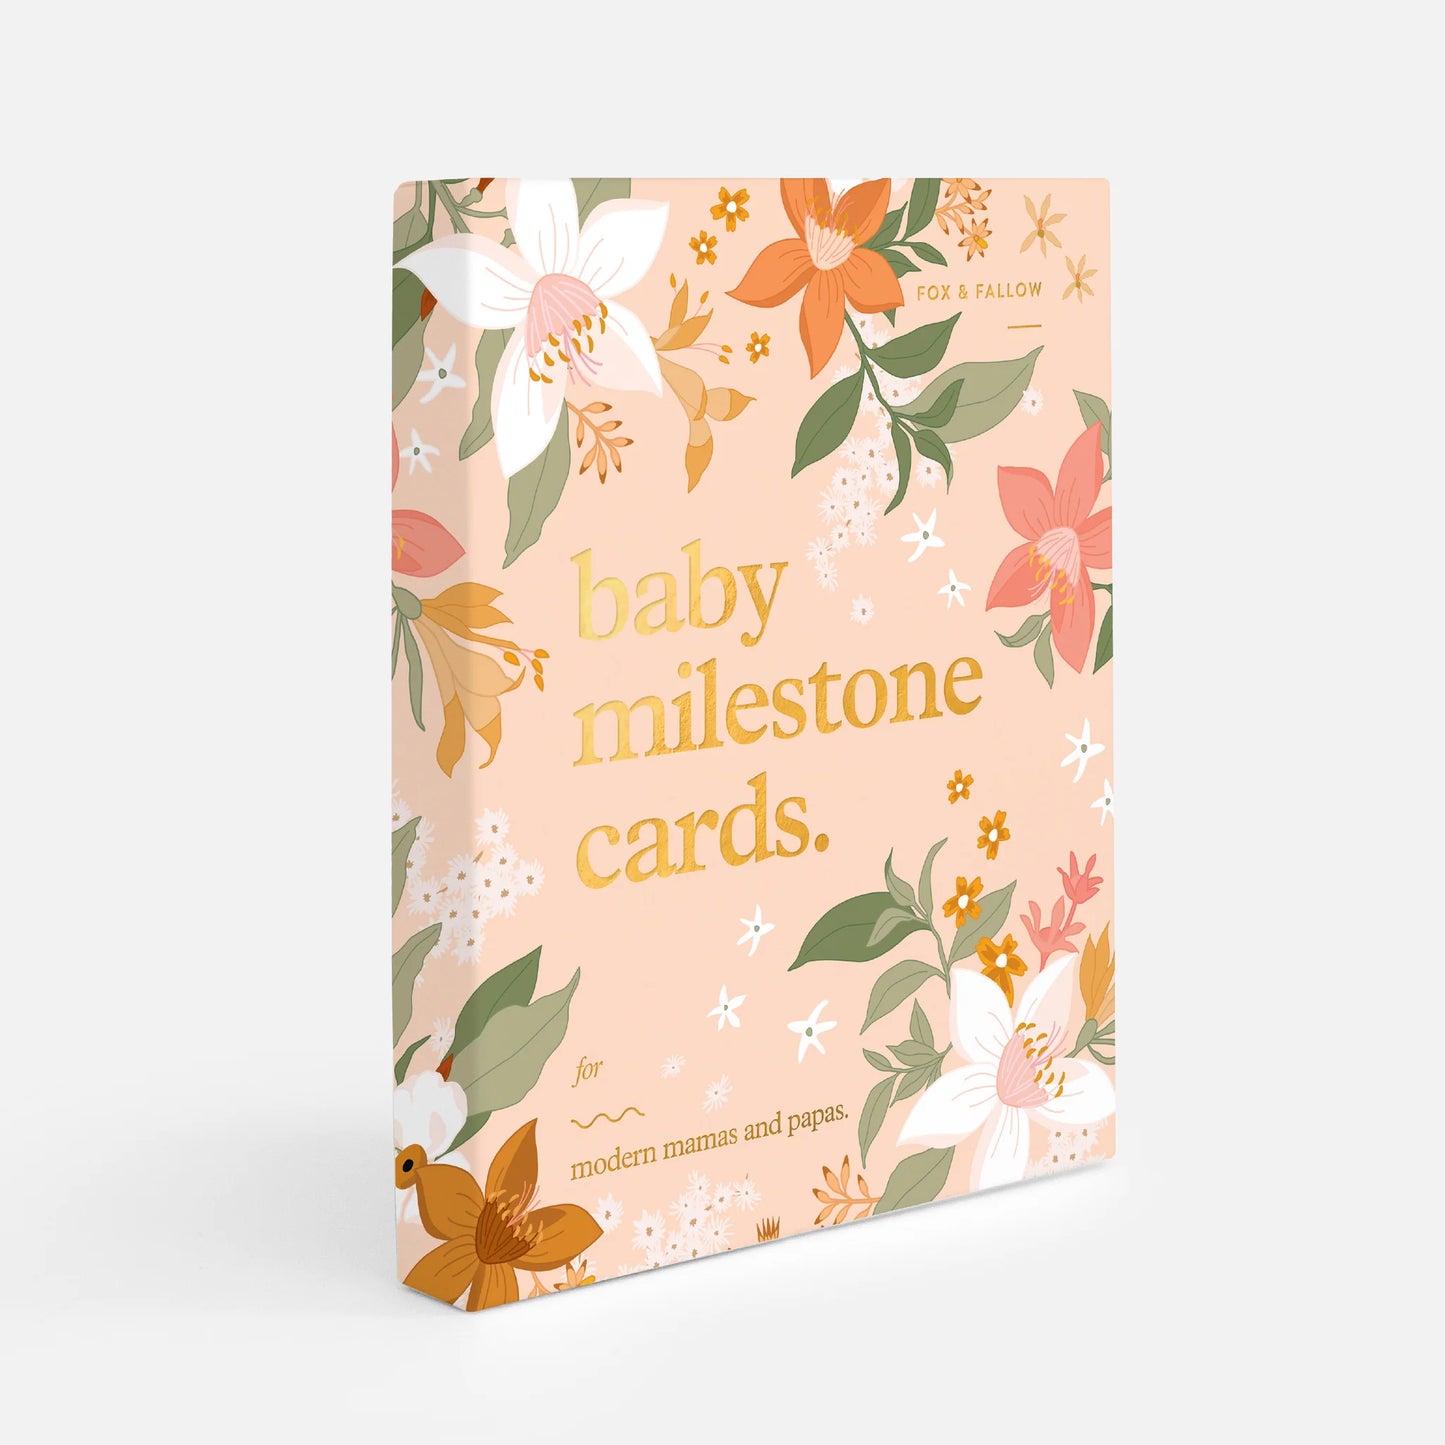 Fox and Fallow Baby Milestone Cards